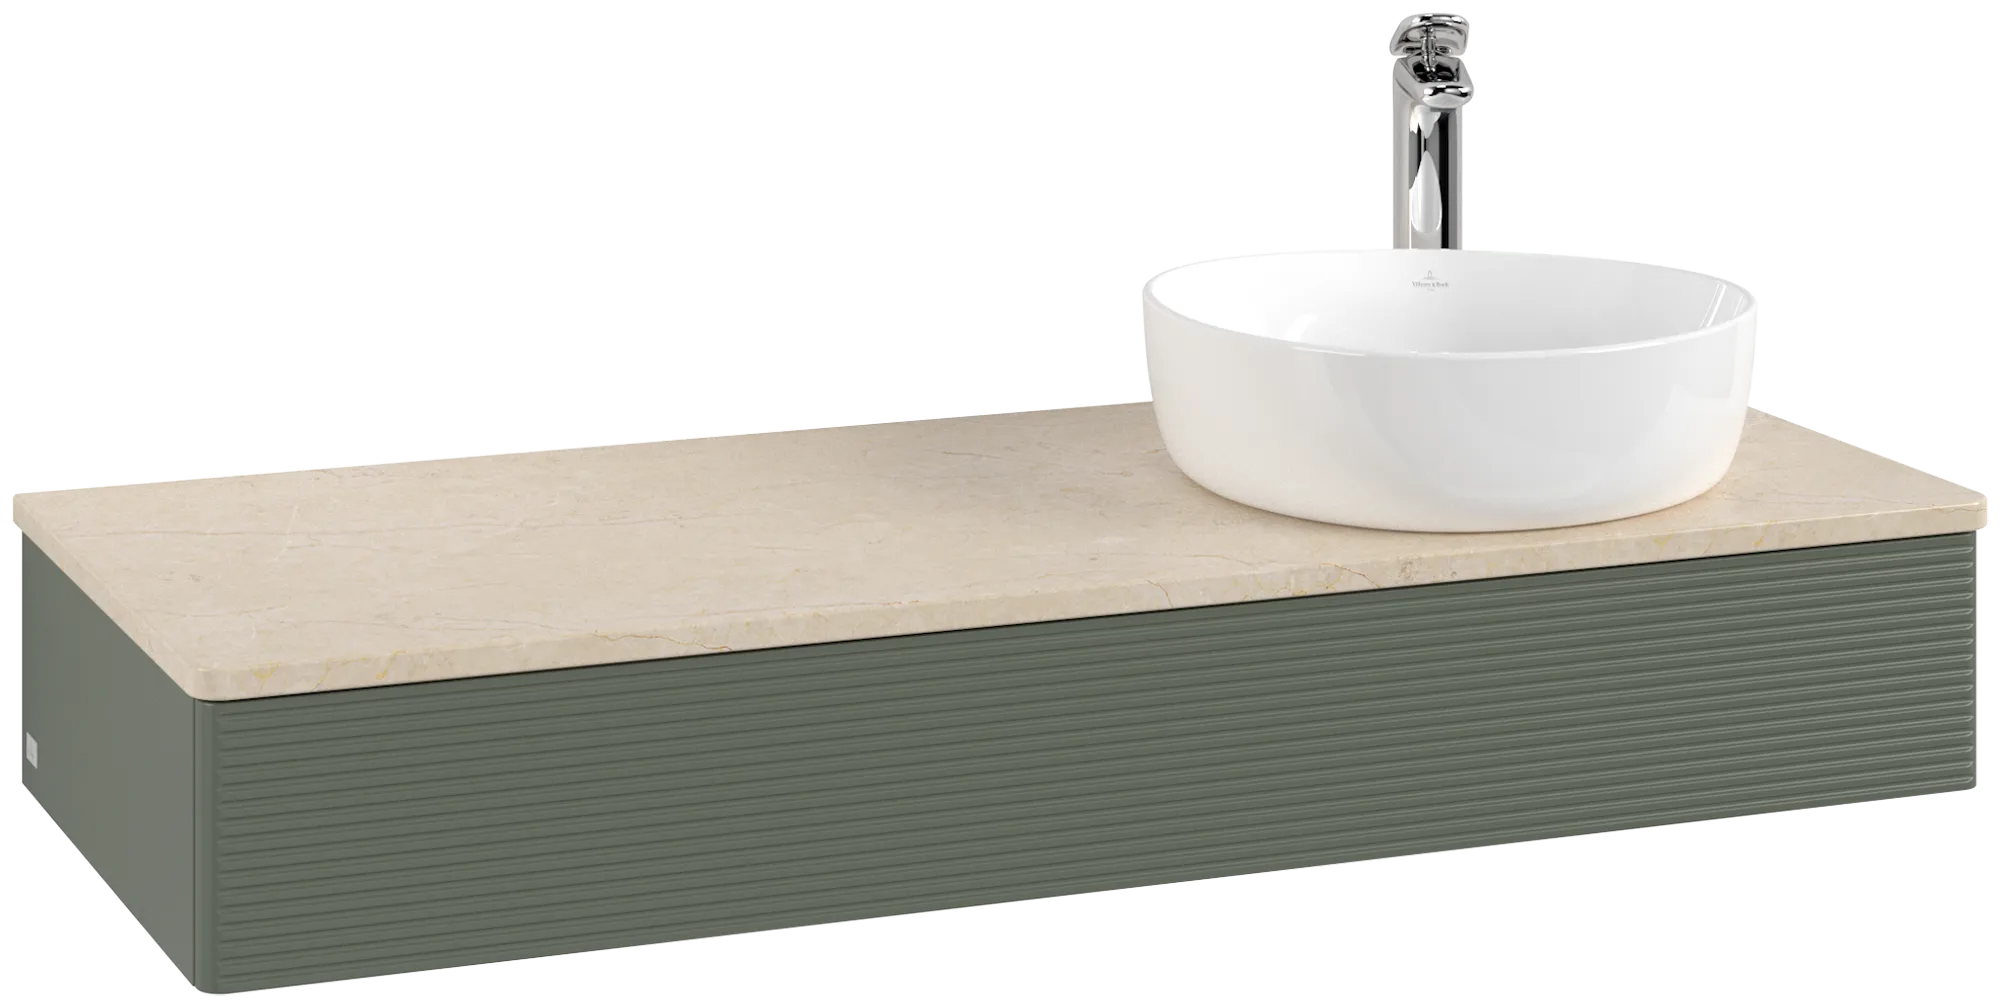 Picture of VILLEROY BOCH Antao Vanity unit, 1 pull-out compartment, 1200 x 190 x 500 mm, Front with grain texture, Leaf Green Matt Lacquer / Botticino #K12153HL